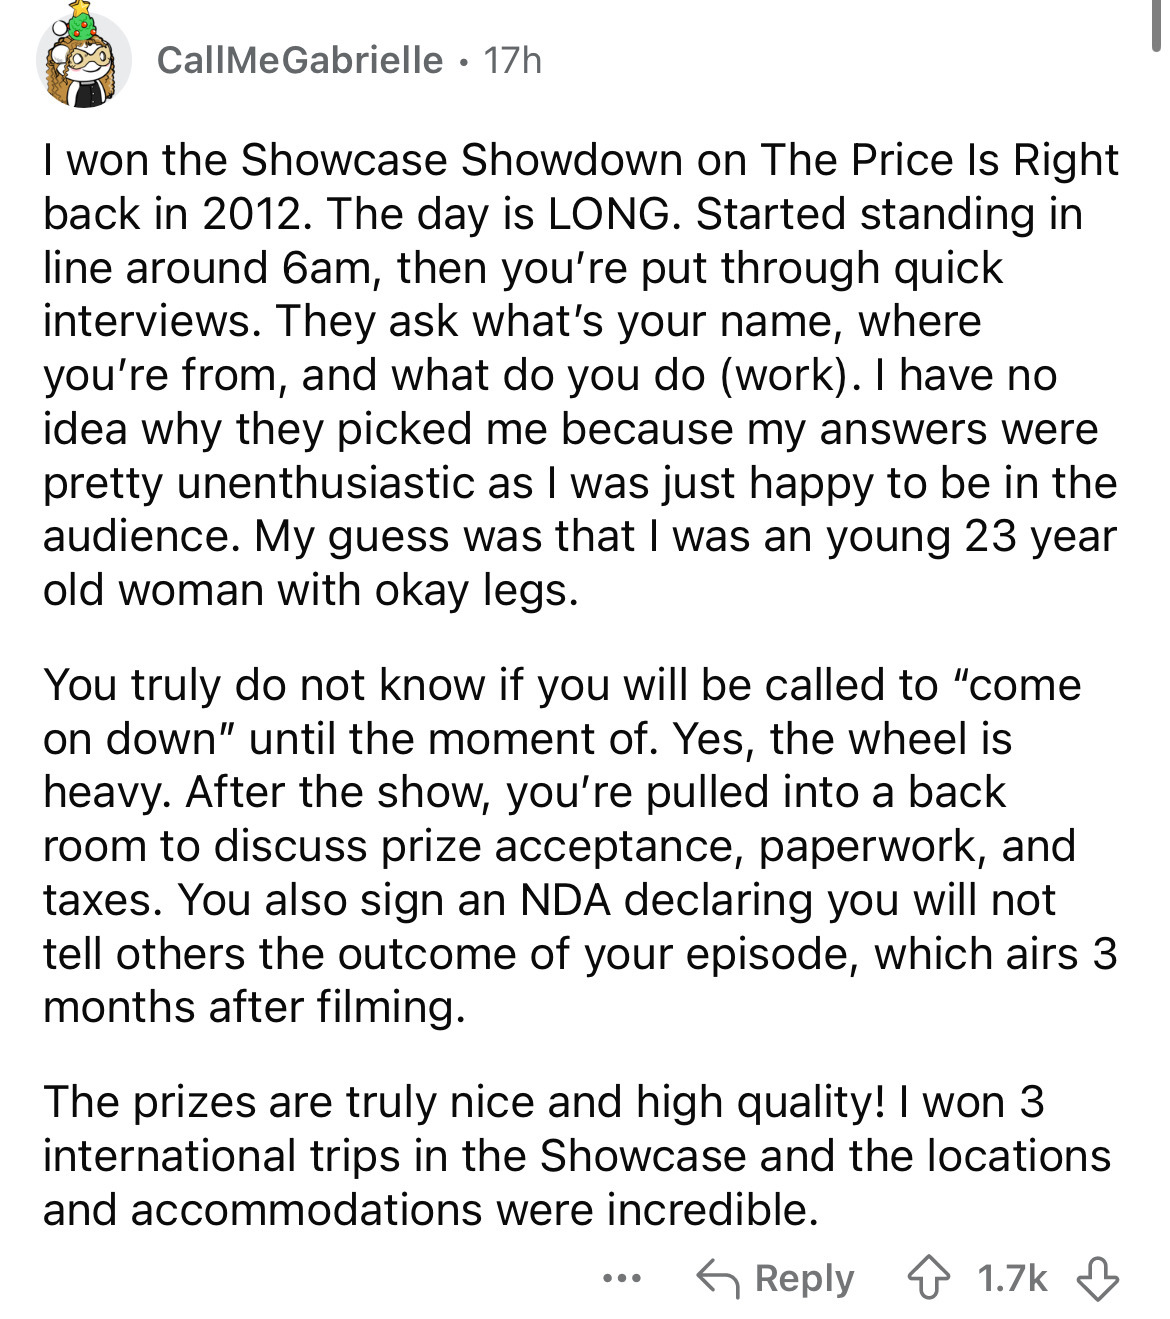 document - CallMeGabrielle 17h I won the Showcase Showdown on The Price Is Right back in 2012. The day is Long. Started standing in line around 6am, then you're put through quick interviews. They ask what's your name, where you're from, and what do you do